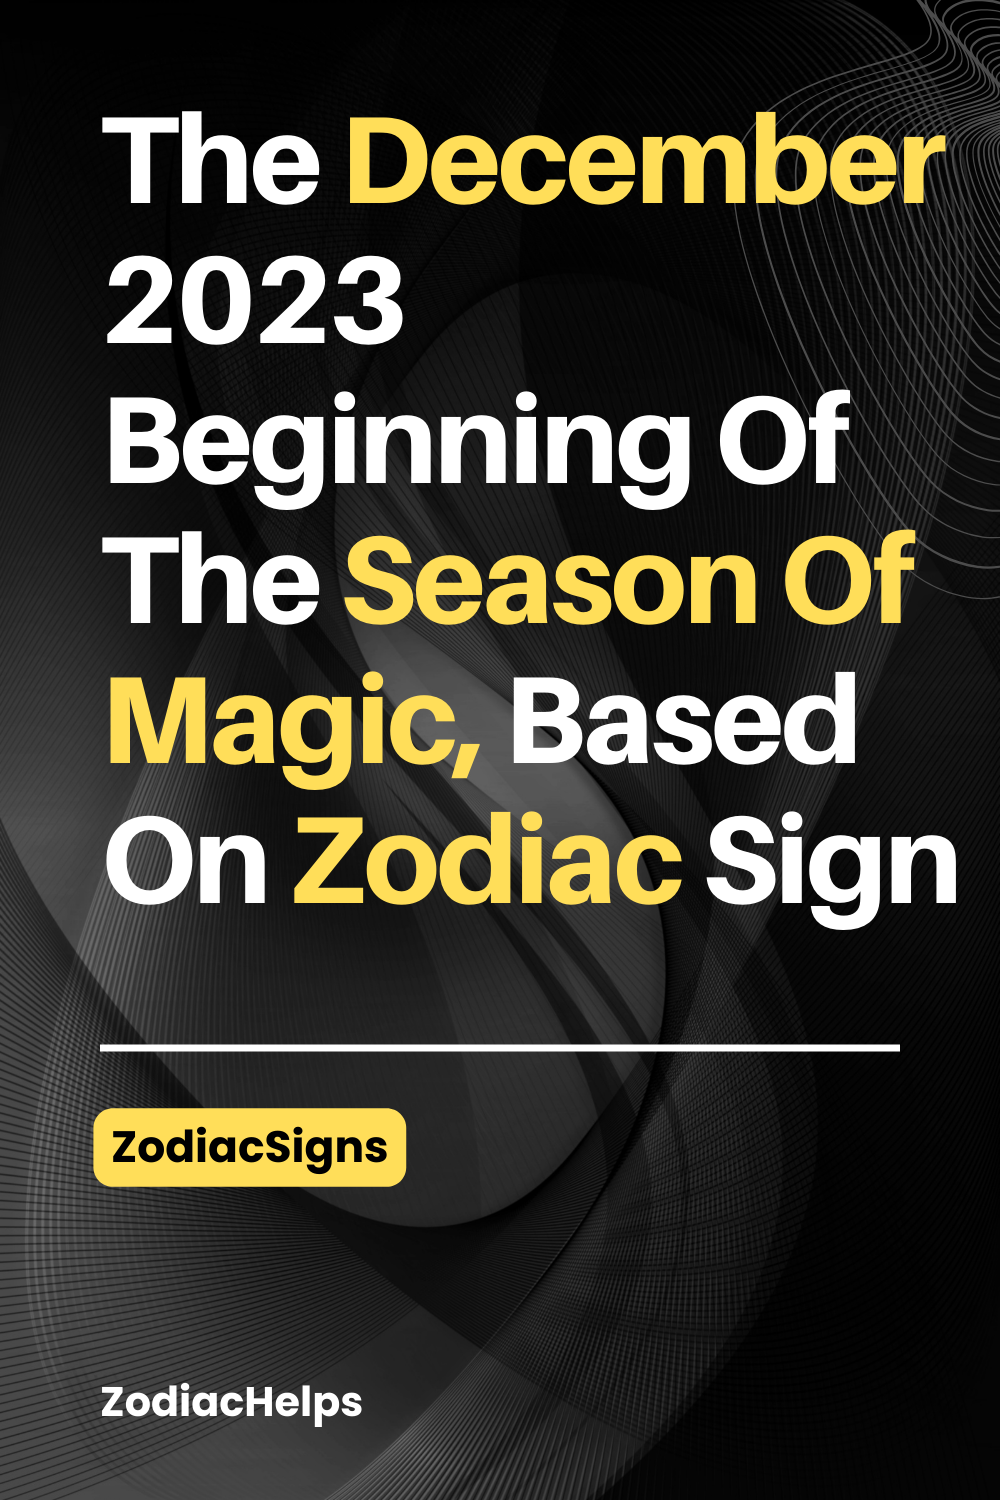 The December 2023 Beginning Of The Season Of Magic, Based On Zodiac Sign